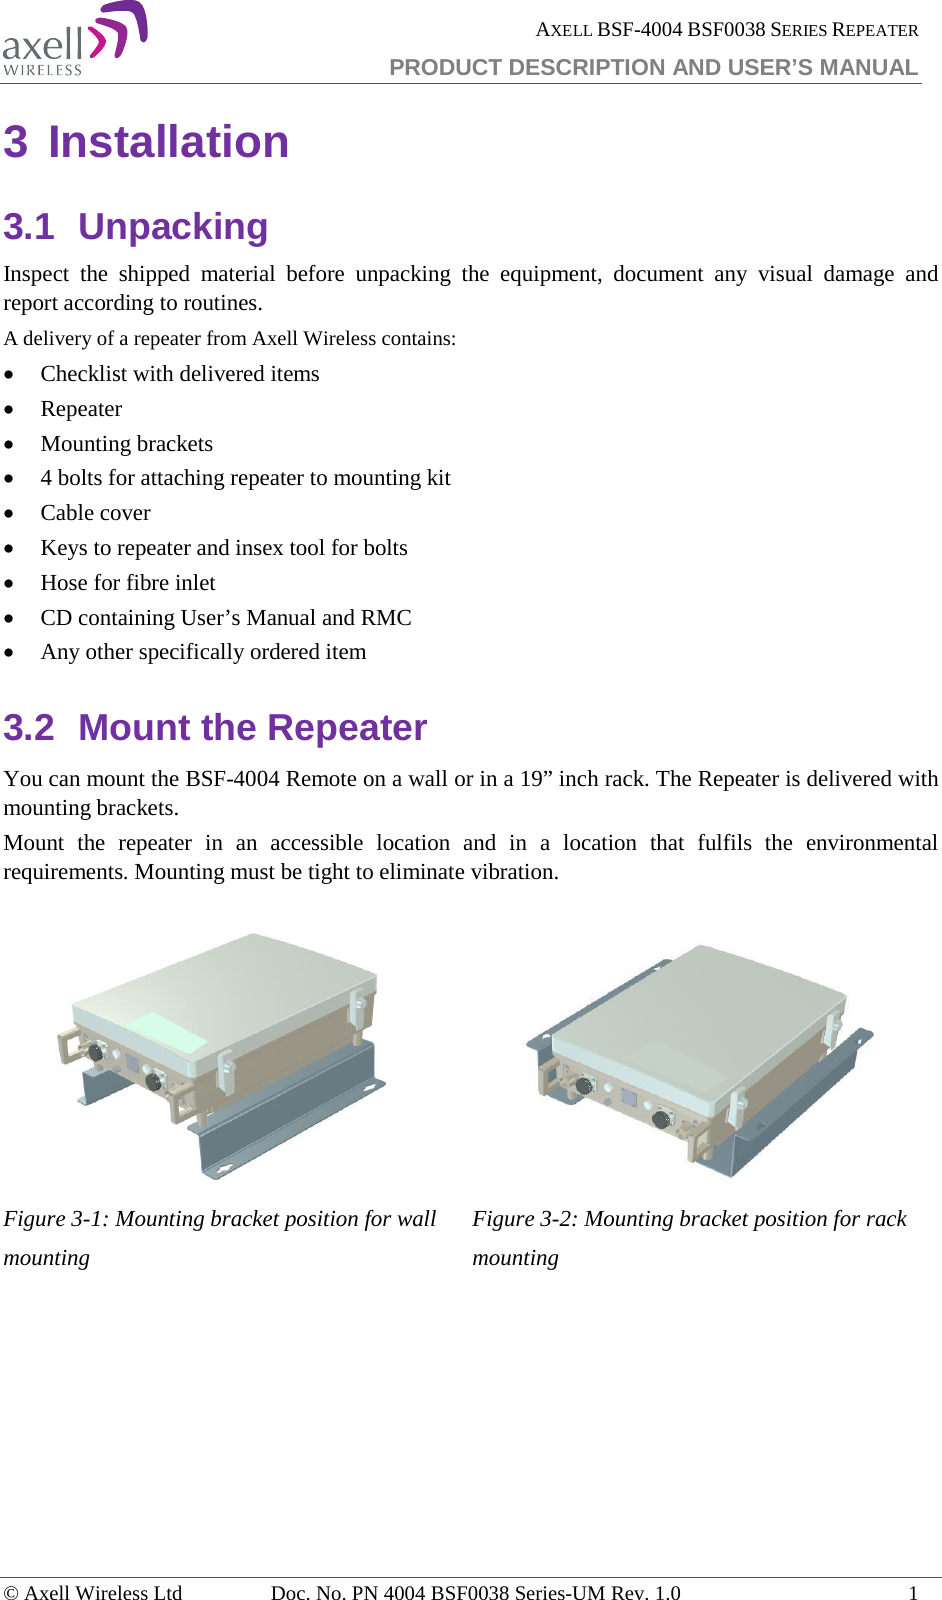  AXELL BSF-4004 BSF0038 SERIES REPEATER PRODUCT DESCRIPTION AND USER’S MANUAL 3 Installation 3.1 Unpacking Inspect the shipped material before unpacking the equipment, document any visual damage and report according to routines. A delivery of a repeater from Axell Wireless contains: • Checklist with delivered items • Repeater • Mounting brackets • 4 bolts for attaching repeater to mounting kit • Cable cover • Keys to repeater and insex tool for bolts • Hose for fibre inlet • CD containing User’s Manual and RMC • Any other specifically ordered item 3.2 Mount the Repeater You can mount the BSF-4004 Remote on a wall or in a 19” inch rack. The Repeater is delivered with mounting brackets.  Mount the repeater in an accessible location and in a location that fulfils the environmental requirements. Mounting must be tight to eliminate vibration.  Figure  3-1: Mounting bracket position for wall mounting  Figure  3-2: Mounting bracket position for rack mounting    © Axell Wireless Ltd Doc. No. PN 4004 BSF0038 Series-UM Rev. 1.0  1 